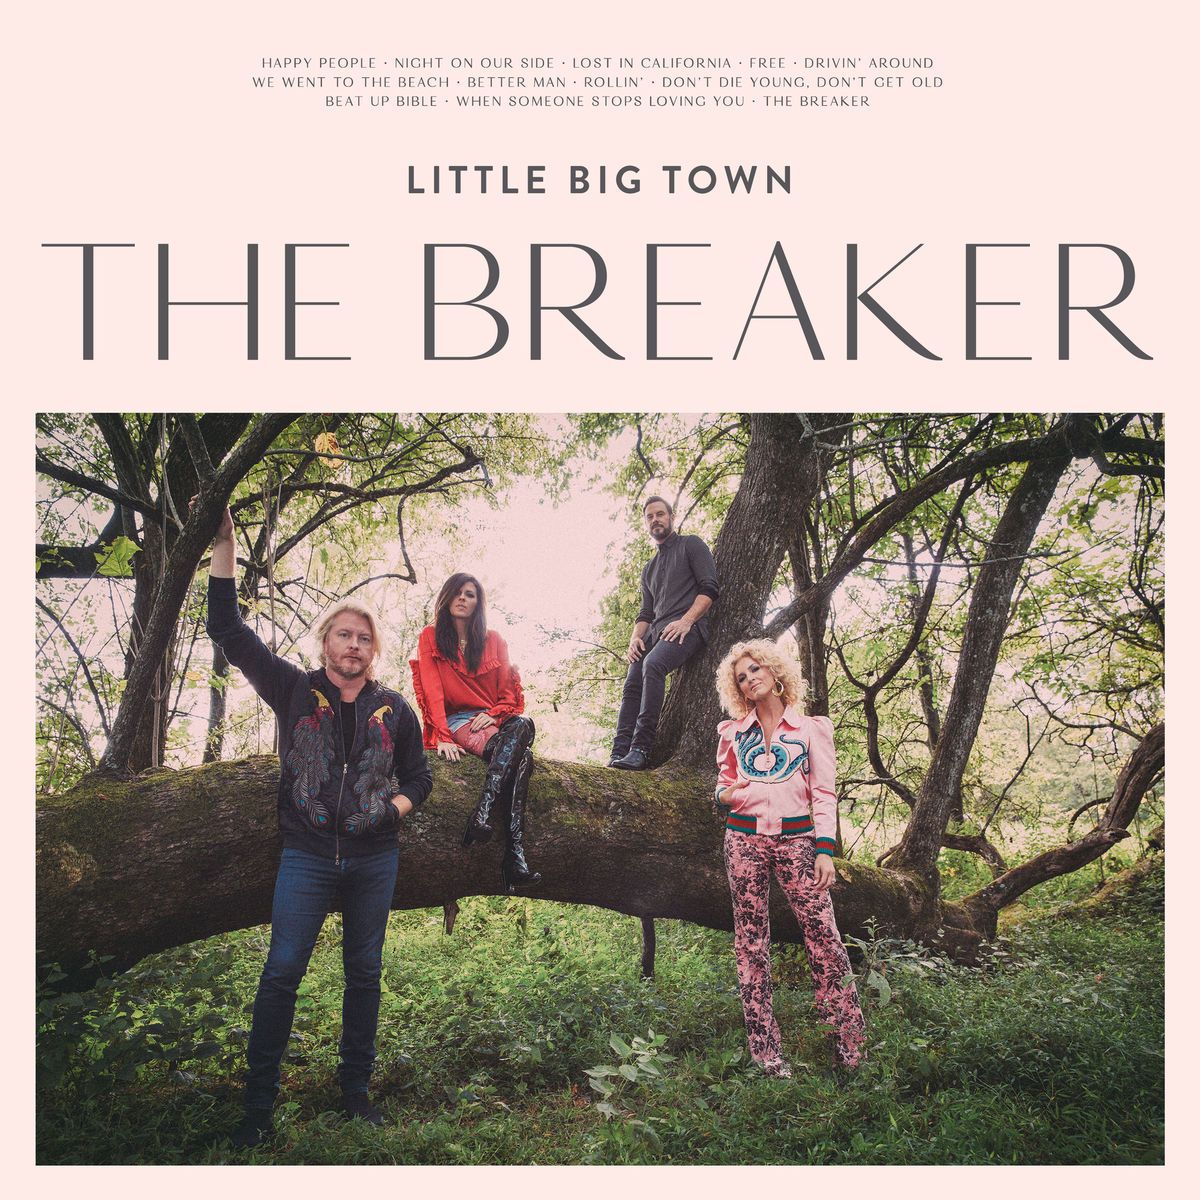 LITTLE BIG TOWN’S THE BREAKER RELEASES TO CRITICAL ACCOLADES